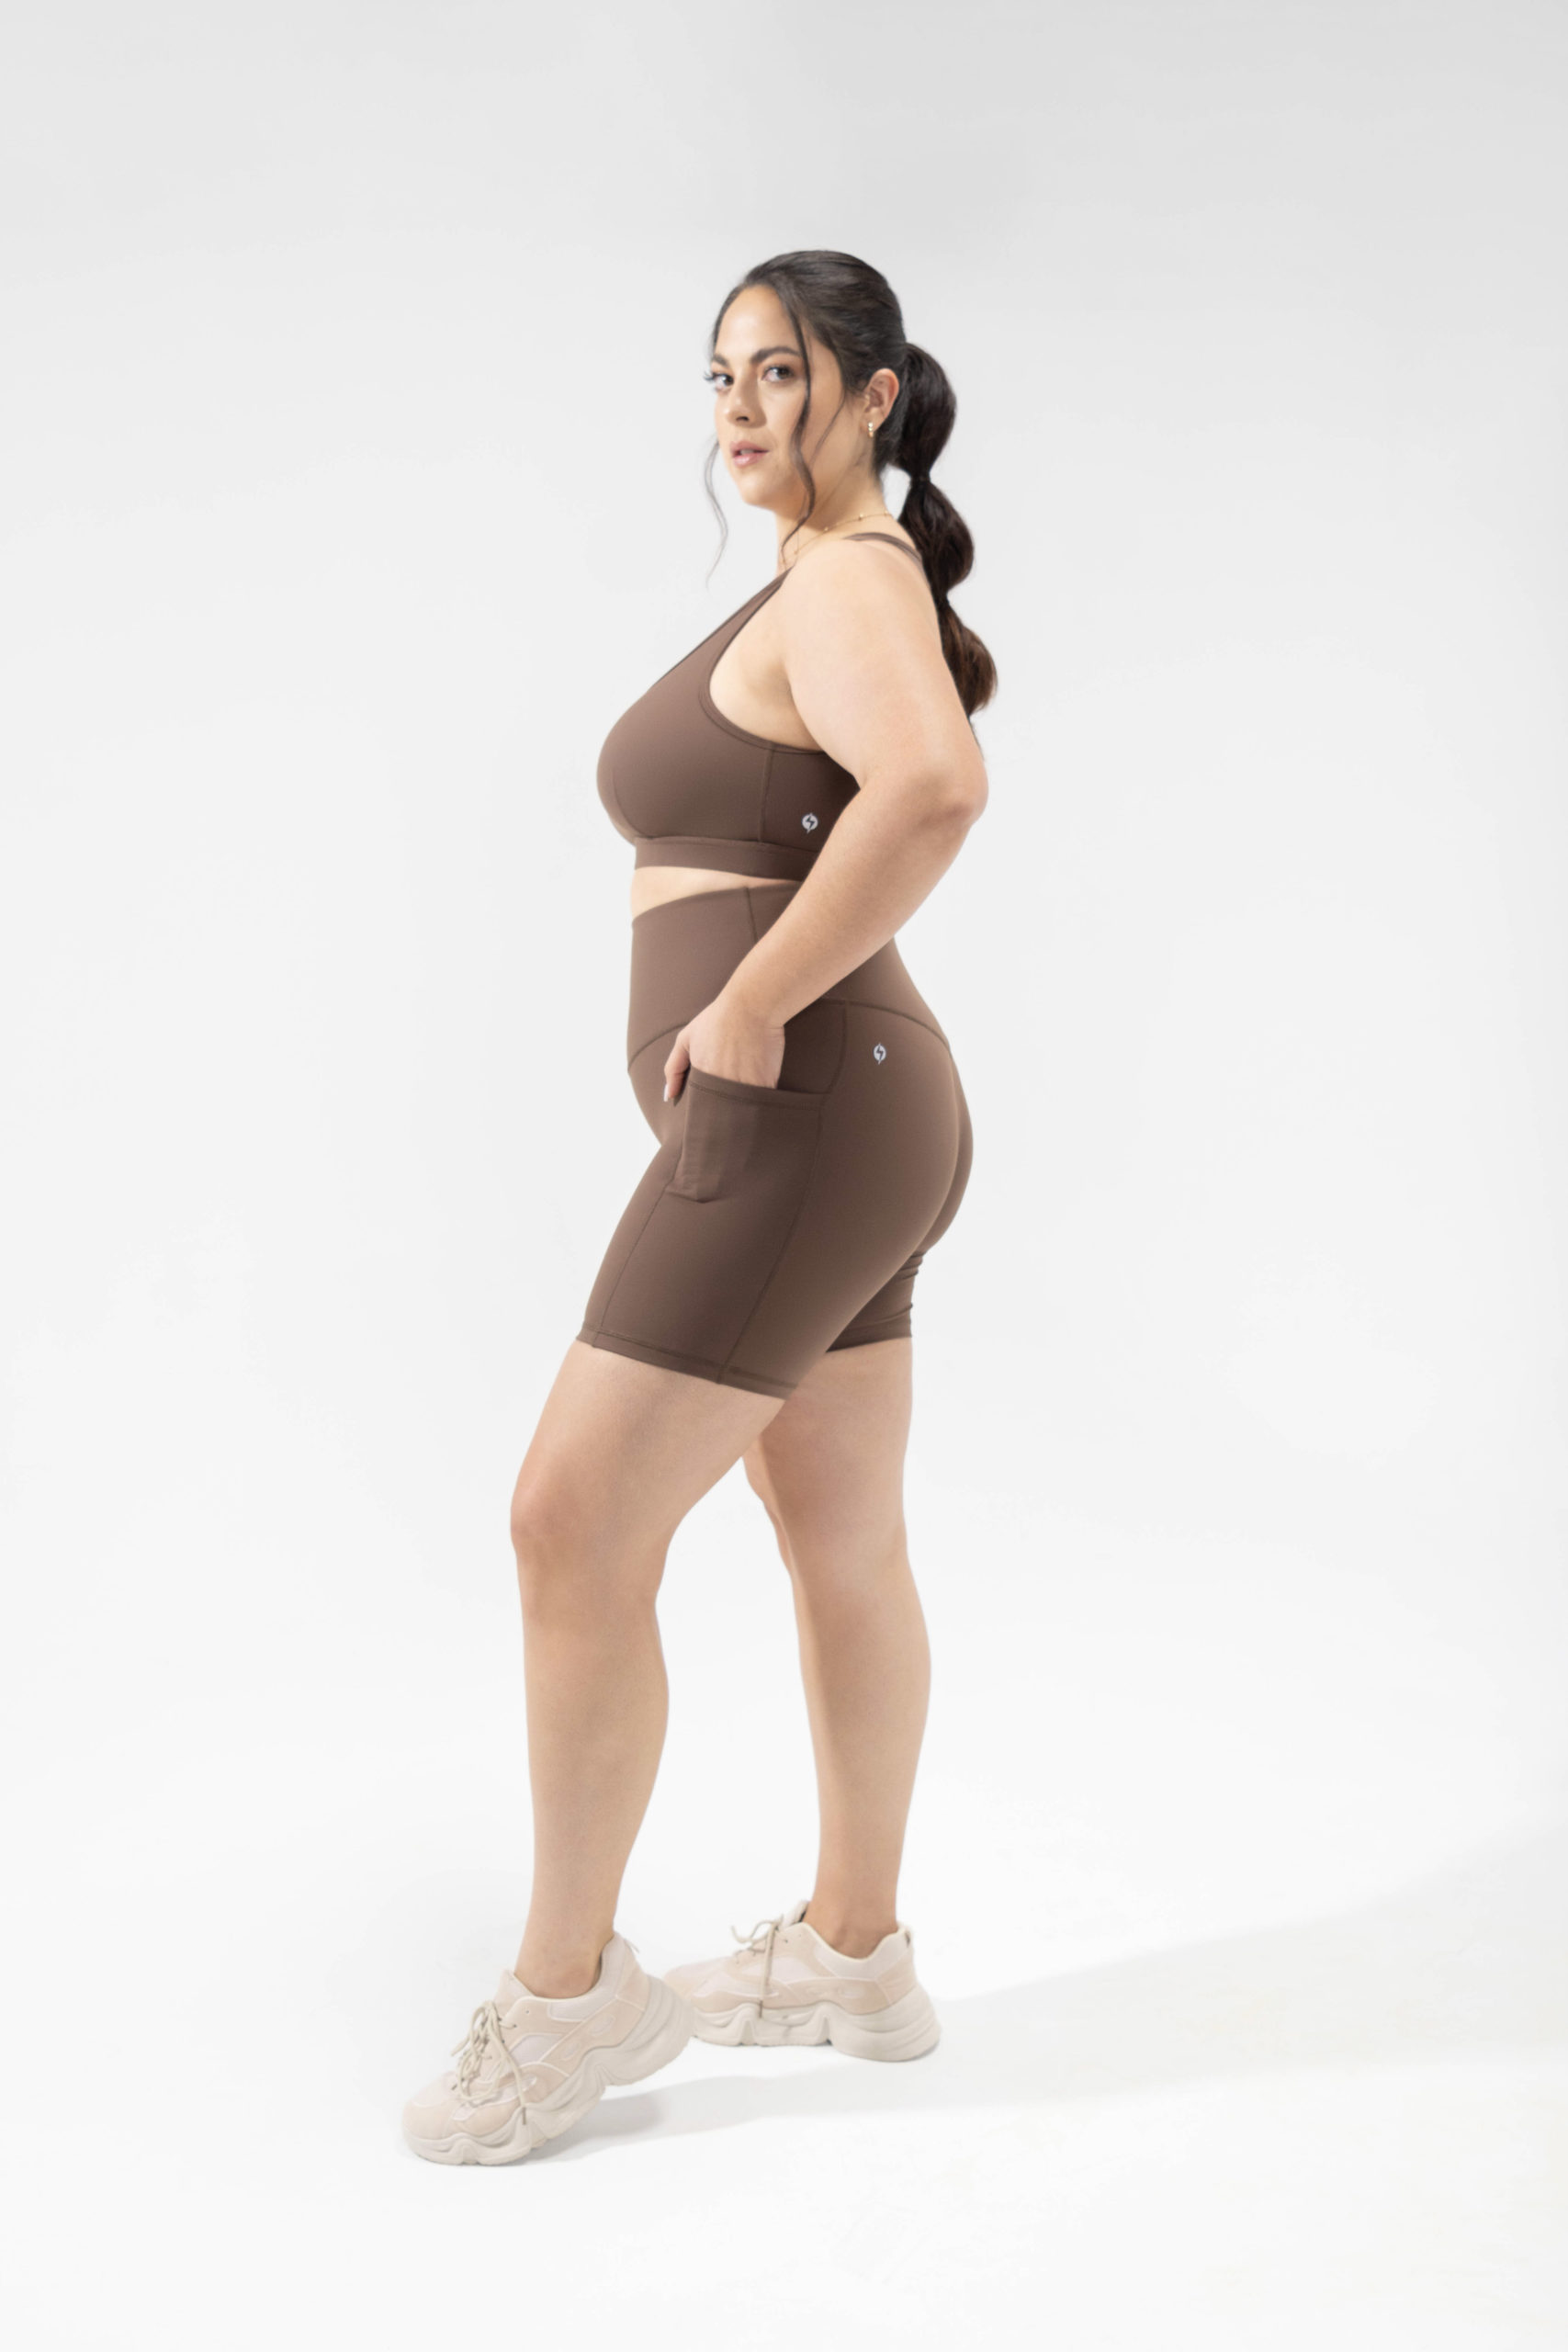 popflex captivate bra and supersculpt short with pockets in mocha